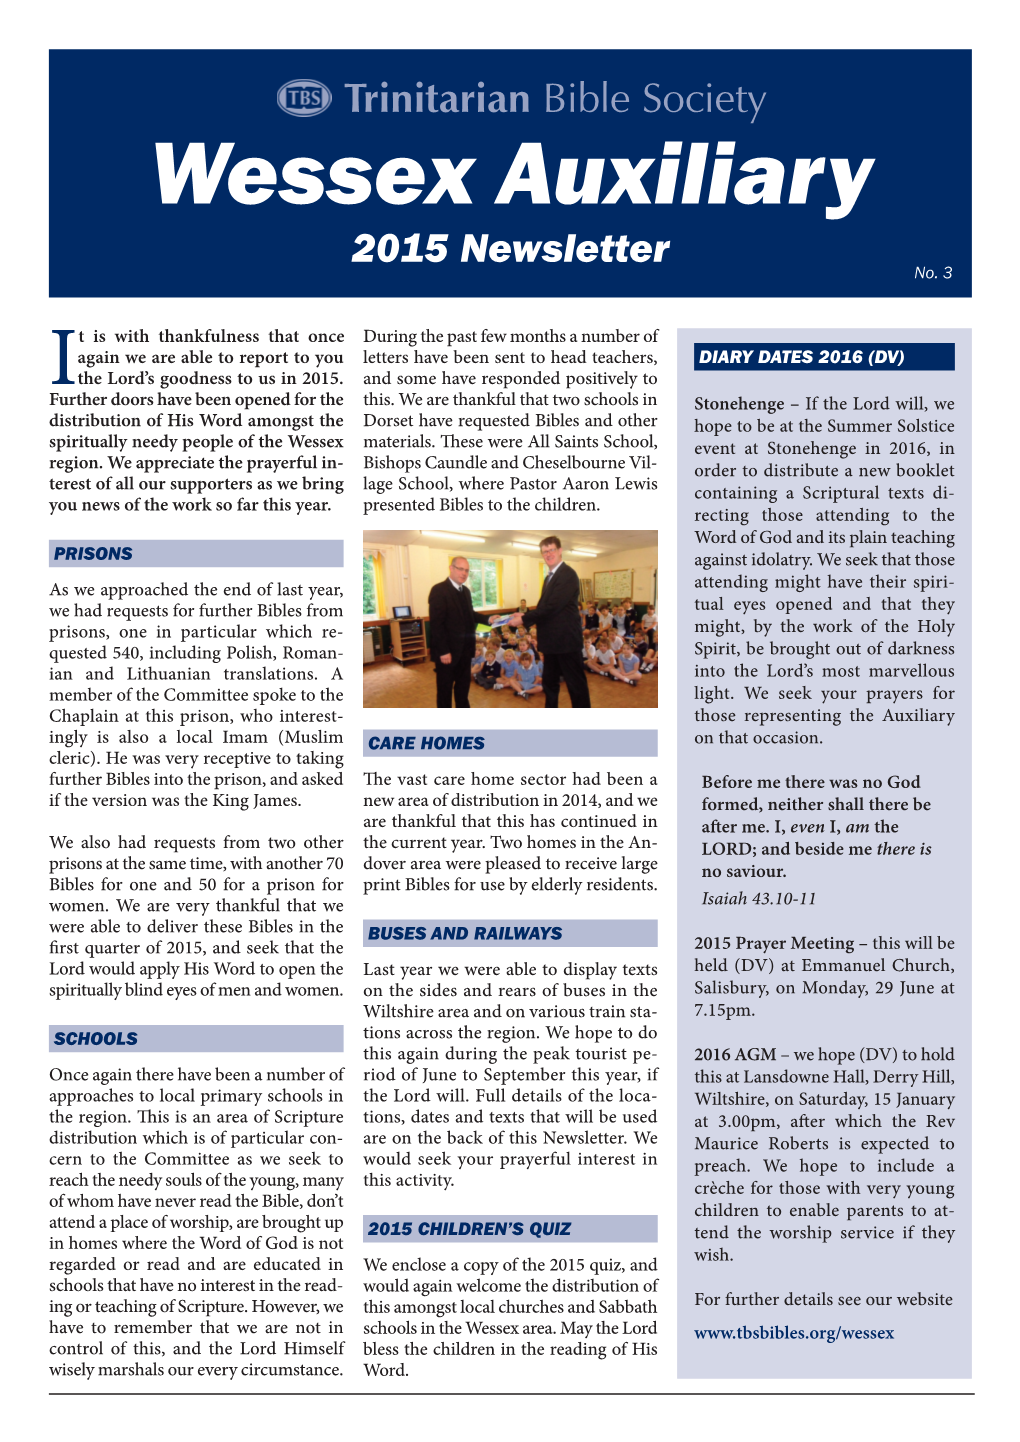 Wessex Auxiliary 2015 Newsletter No